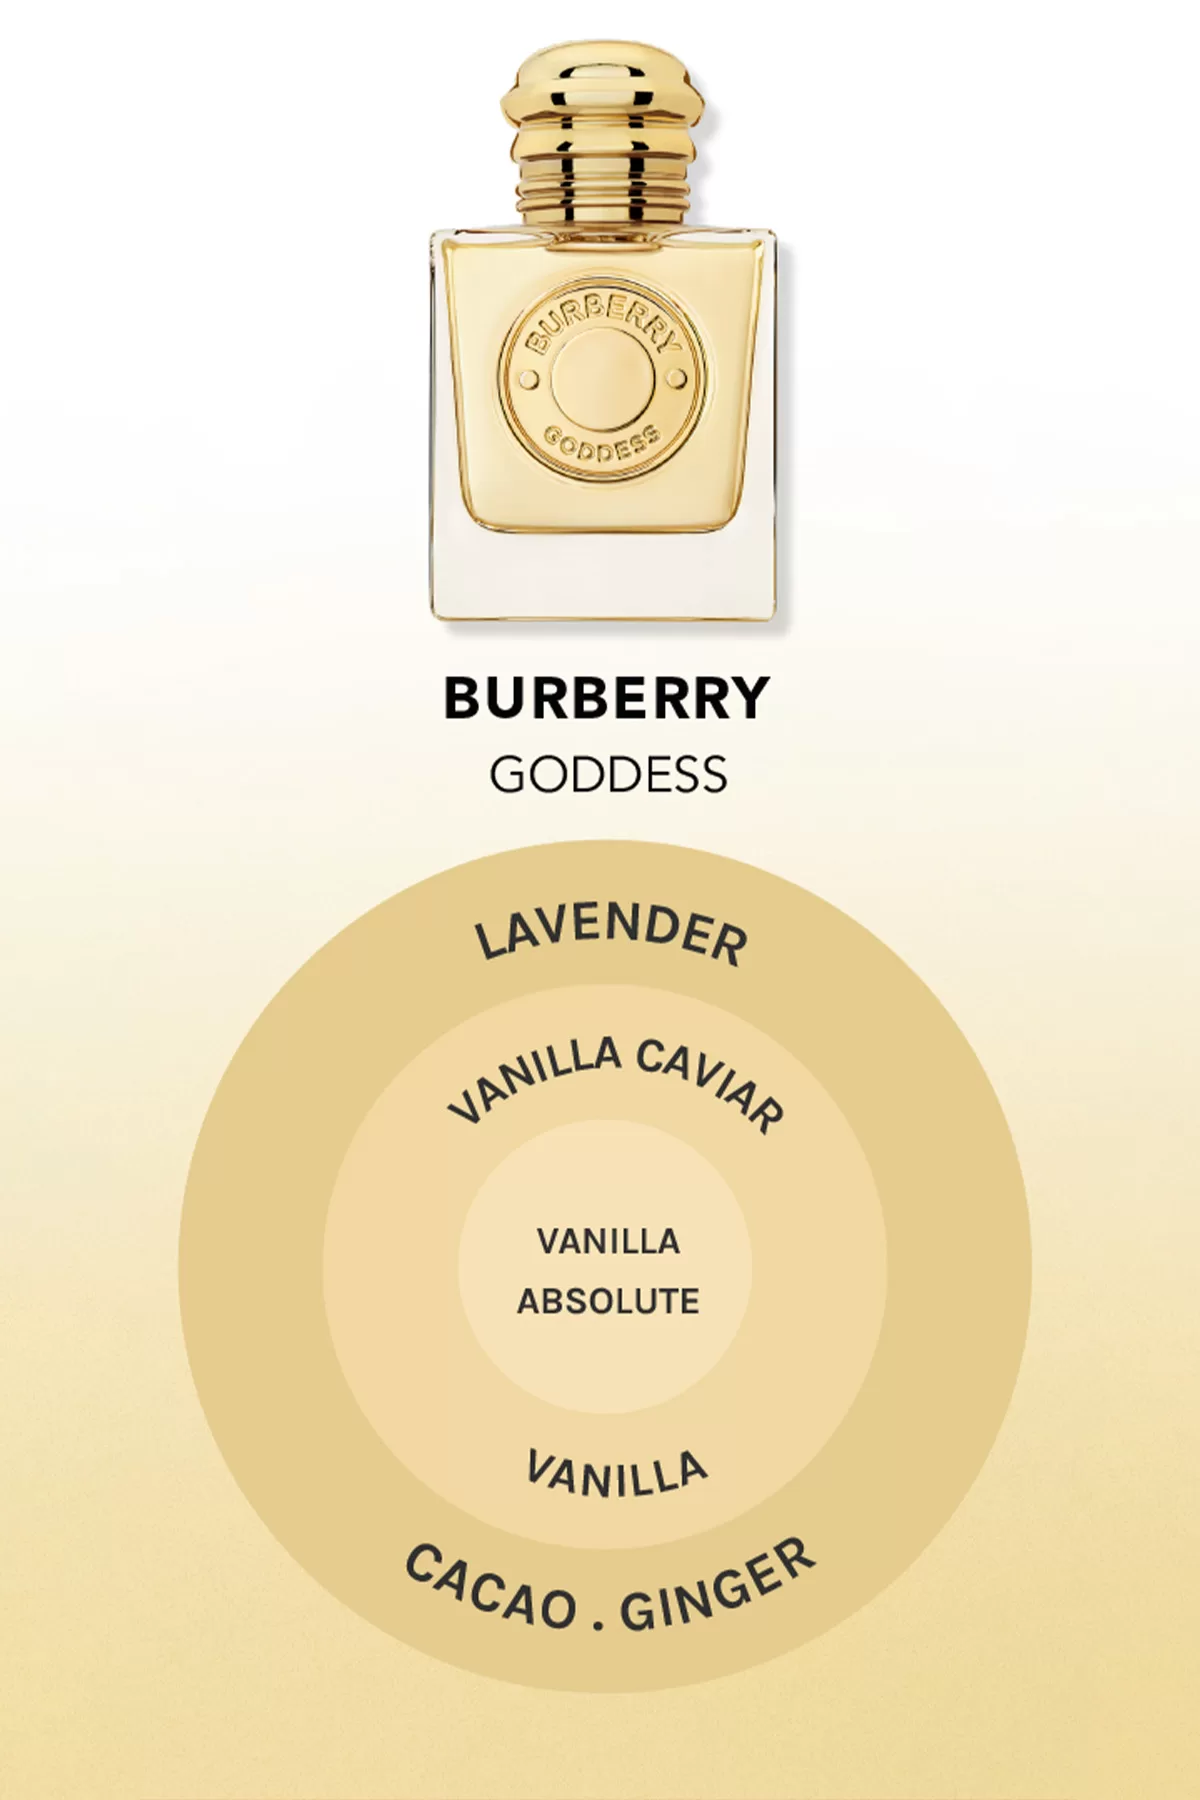 What does the new Burberry Goddess smell like?